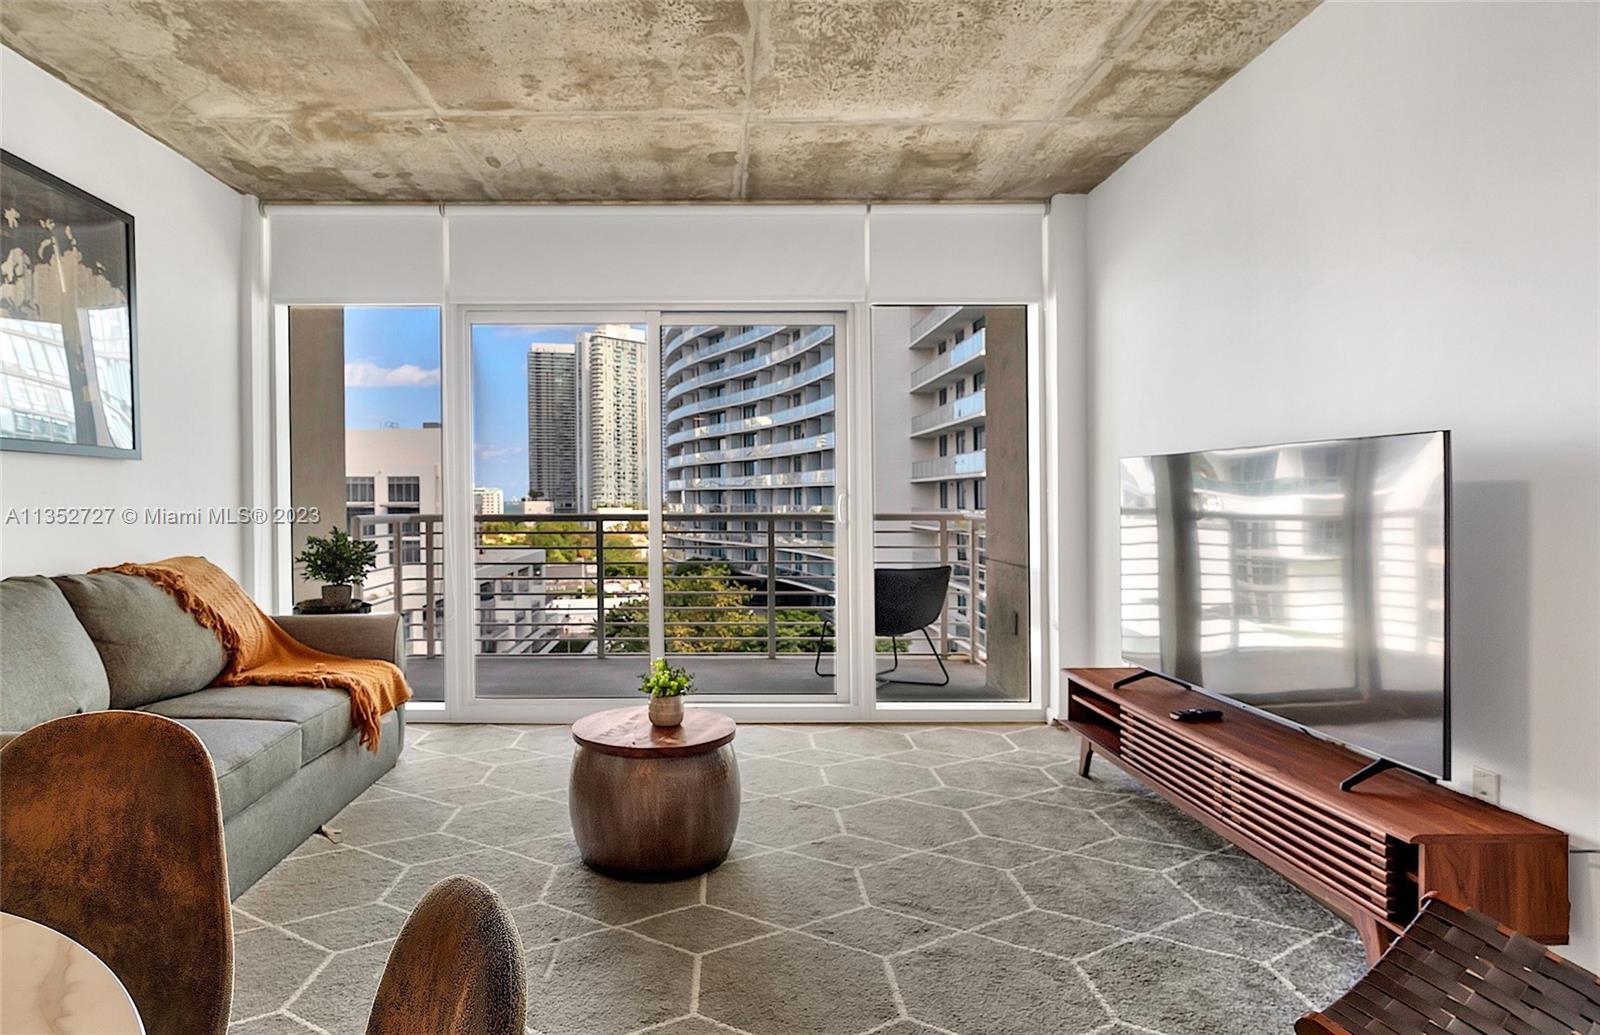 Fall in love with this Ultra-Modern 1 Bed + 1 Bath in the heart of Midtown. 10 Feet high ceilings! W